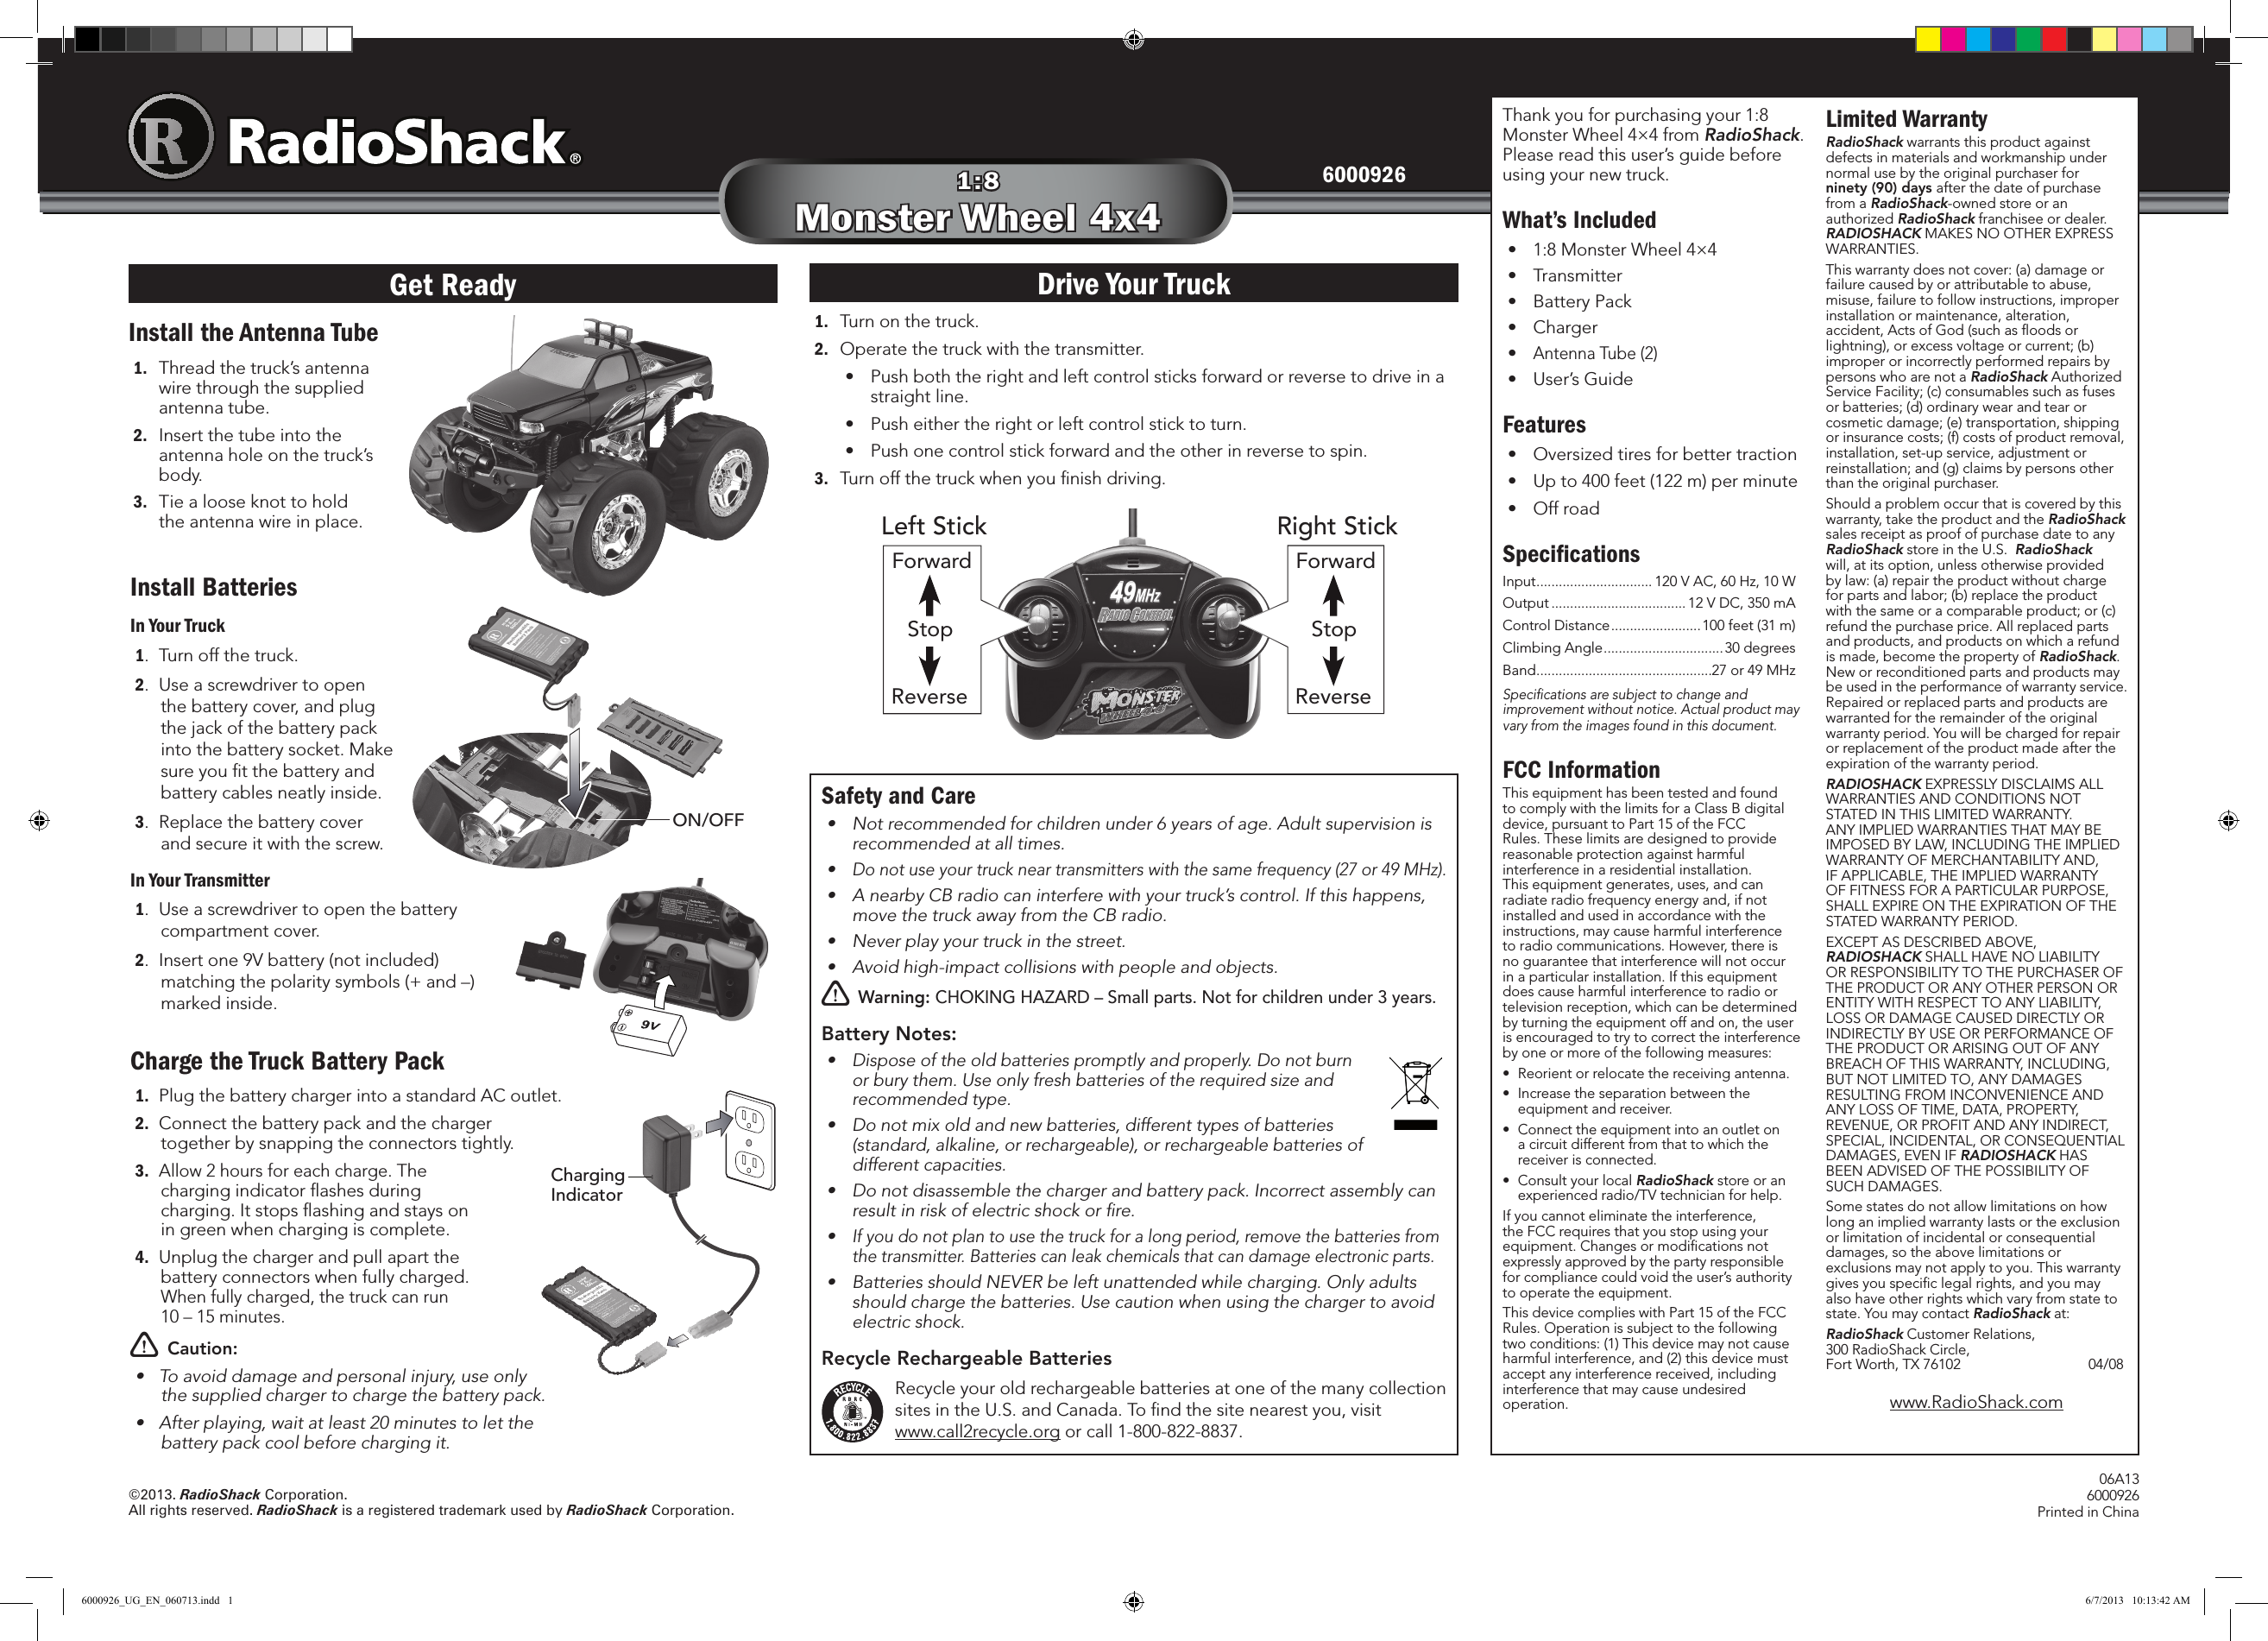 ©2013. RadioShack Corporation. All rights reserved. RadioShack is a registered trademark used by RadioShack Corporation.06A136000926Printed in China60009261:8Monster Wheel 4x4Charge the Truck Battery Pack1.  Plug the battery charger into a standard AC outlet.2.  Connect the battery pack and the charger together by snapping the connectors tightly. 3. Allow 2 hours for each charge. The charging indicator ﬂashes during charging. It stops ﬂashing and stays on in green when charging is complete. 4.  Unplug the charger and pull apart the battery connectors when fully charged. When fully charged, the truck can run  10 – 15 minutes.w Caution:• Toavoiddamageandpersonalinjury,useonlythesuppliedchargertochargethebatterypack.• Afterplaying,waitatleast20minutestoletthebatterypackcoolbeforechargingit.Install the Antenna Tube1.  Thread the truck’s antenna wire through the supplied antenna tube. 2.  Insert the tube into the antenna hole on the truck’s body.3.  Tie a loose knot to hold the antenna wire in place.1.  Turn on the truck.2.  Operate the truck with the transmitter.• Pushboththerightandleftcontrolsticksforwardorreversetodriveinastraight line.• Pusheithertherightorleftcontrolsticktoturn.• Pushonecontrolstickforwardandtheotherinreversetospin.3. Turnoffthetruckwhenyounishdriving.Thank you for purchasing your 1:8 Monster Wheel 4×4 from RadioShack. Please read this user’s guide before using your new truck.What’s Included•1:8 Monster Wheel 4×4• Transmitter• BatteryPack• Charger•Antenna Tube (2)• User’sGuideFeatures• Oversizedtiresforbettertraction•Up to 400 feet (122 m) per minute• OffroadSpeciﬁcationsInput ............................... 120VAC,60Hz,10WOutput .................................... 12 V DC, 350 mAControl Distance ........................100 feet (31 m)Climbing Angle ................................30 degreesBand ...............................................27or49MHzSpecicationsaresubjecttochangeandimprovementwithoutnotice.Actualproductmayvaryfromtheimagesfoundinthisdocument.FCC InformationThis equipment has been tested and found tocomplywiththelimitsforaClassBdigitaldevice,pursuanttoPart15oftheFCCRules.Theselimitsaredesignedtoprovidereasonable protection against harmful interference in a residential installation. This equipment generates, uses, and can radiate radio frequency energy and, if not installed and used in accordance with the instructions, may cause harmful interference toradiocommunications.However,thereisno guarantee that interference will not occur in a particular installation. If this equipment does cause harmful interference to radio or televisionreception,whichcanbedeterminedby turning the equipment off and on, the user is encouraged to try to correct the interference by one or more of the following measures:• Reorientorrelocatethereceivingantenna.• Increasetheseparationbetweentheequipmentandreceiver.• Connecttheequipmentintoanoutletona circuit different from that to which the receiverisconnected.• ConsultyourlocalRadioShack store or an experienced radio/TV technician for help.If you cannot eliminate the interference, theFCCrequiresthatyoustopusingyourequipment. Changes or modiﬁcations not expresslyapprovedbythepartyresponsibleforcompliancecouldvoidtheuser’sauthorityto operate the equipment.ThisdevicecomplieswithPart15oftheFCCRules. Operation is subject to the following twoconditions:(1)Thisdevicemaynotcauseharmfulinterference,and(2)thisdevicemustacceptanyinterferencereceived,includinginterference that may cause undesired operation.Limited WarrantyRadioShack warrants this product against defects in materials and workmanship under normal use by the original purchaser for ninety (90) days after the date of purchase from a RadioShack-owned store or an authorizedRadioShack franchisee or dealer.  RADIOSHACK MAKES NO OTHER EXPRESS WARRANTIES.Thiswarrantydoesnotcover:(a)damageorfailure caused by or attributable to abuse, misuse, failure to follow instructions, improper installation or maintenance, alteration, accident,ActsofGod(suchasoodsorlightning),orexcessvoltageorcurrent;(b)improper or incorrectly performed repairs by persons who are not a RadioShackAuthorizedServiceFacility;(c)consumablessuchasfusesorbatteries;(d)ordinarywearandtearorcosmeticdamage;(e)transportation,shippingorinsurancecosts;(f)costsofproductremoval,installation,set-upservice,adjustmentorreinstallation;and(g)claimsbypersonsotherthan the original purchaser.Shouldaproblemoccurthatiscoveredbythiswarranty, take the product and the RadioShack sales receipt as proof of purchase date to any RadioShack store in the U.S.  RadioShack will,atitsoption,unlessotherwiseprovidedby law: (a) repair the product without charge forpartsandlabor;(b)replacetheproductwiththesameoracomparableproduct;or(c)refund the purchase price. All replaced parts and products, and products on which a refund is made, become the property of RadioShack.  New or reconditioned parts and products may beusedintheperformanceofwarrantyservice.Repaired or replaced parts and products are warranted for the remainder of the original warranty period. You will be charged for repair or replacement of the product made after the expiration of the warranty period.RADIOSHACK EXPRESSLY DISCLAIMS ALL WARRANTIES AND CONDITIONS NOT STATED IN THIS LIMITED WARRANTY.  ANYIMPLIEDWARRANTIESTHATMAYBEIMPOSEDBYLAW,INCLUDINGTHEIMPLIEDWARRANTYOFMERCHANTABILITYAND,IFAPPLICABLE,THEIMPLIEDWARRANTYOFFITNESSFORAPARTICULARPURPOSE,SHALLEXPIREONTHEEXPIRATIONOFTHESTATED WARRANTY PERIOD. EXCEPTASDESCRIBEDABOVE,RADIOSHACKSHALLHAVENOLIABILITYORRESPONSIBILITYTOTHEPURCHASEROFTHE PRODUCT OR ANY OTHER PERSON OR ENTITYWITHRESPECTTOANYLIABILITY,LOSSORDAMAGECAUSEDDIRECTLYORINDIRECTLYBYUSEORPERFORMANCEOFTHEPRODUCTORARISINGOUTOFANYBREACHOFTHISWARRANTY,INCLUDING,BUTNOTLIMITEDTO,ANYDAMAGESRESULTINGFROMINCONVENIENCEANDANYLOSSOFTIME,DATA,PROPERTY,REVENUE,ORPROFITANDANYINDIRECT,SPECIAL, INCIDENTAL, OR CONSEQUENTIAL DAMAGES,EVENIFRADIOSHACK HAS BEENADVISEDOFTHEPOSSIBILITYOFSUCHDAMAGES.Some states do not allow limitations on how long an implied warranty lasts or the exclusion or limitation of incidental or consequential damages,sotheabovelimitationsorexclusions may not apply to you. This warranty givesyouspeciclegalrights,andyoumayalsohaveotherrightswhichvaryfromstatetostate. You may contact RadioShack at:RadioShack Customer Relations, 300 RadioShack Circle,  FortWorth,TX76102  04/08www.RadioShack.comDrive Your TruckGet ReadySafety and Care• Notrecommendedforchildrenunder6yearsofage.Adultsupervisionisrecommendedatalltimes.•Donotuseyourtruckneartransmitterswiththesamefrequency(27or49MHz).• AnearbyCBradiocaninterferewithyourtruck’scontrol.Ifthishappens,movethetruckawayfromtheCBradio.• Neverplayyourtruckinthestreet.• Avoidhigh-impactcollisionswithpeopleandobjects.w Warning: CHOKING HAZARD – Small parts. Not for children under 3 years.Battery Notes:•Disposeoftheoldbatteriespromptlyandproperly.Donotburnorburythem.Useonlyfreshbatteriesoftherequiredsizeandrecommendedtype.•Donotmixoldandnewbatteries,differenttypesofbatteries(standard,alkaline,orrechargeable),orrechargeablebatteriesofdifferentcapacities.• Donotdisassemblethechargerandbatterypack.Incorrectassemblycanresultinriskofelectricshockorre.•Ifyoudonotplantousethetruckforalongperiod,removethebatteriesfromthetransmitter.Batteriescanleakchemicalsthatcandamageelectronicparts.• BatteriesshouldNEVERbeleftunattendedwhilecharging.Onlyadultsshouldchargethebatteries.Usecautionwhenusingthechargertoavoidelectricshock.Recycle Rechargeable BatteriesRecycle your old rechargeable batteries at one of the many collection sitesintheU.S.andCanada.Tondthesitenearestyou,visit www.call2recycle.org or call 1-800-822-8837.Install BatteriesIn Your Truck1.  Turn off the truck. 2. Useascrewdrivertoopenthebatterycover,andplugthe jack of the battery pack into the battery socket. Make sure you ﬁt the battery and battery cables neatly inside.3. Replacethebatterycoverand secure it with the screw.In Your Transmitter1. Useascrewdrivertoopenthebatterycompartmentcover.2.  Insert one 9V battery (not included) matching the polarity symbols (+ and –) marked inside.ON/OFFForwardStopReverseForwardStopReverseLeft Stick Right StickCharging Indicator6000926_UG_EN_060713.indd   1 6/7/2013   10:13:42 AM